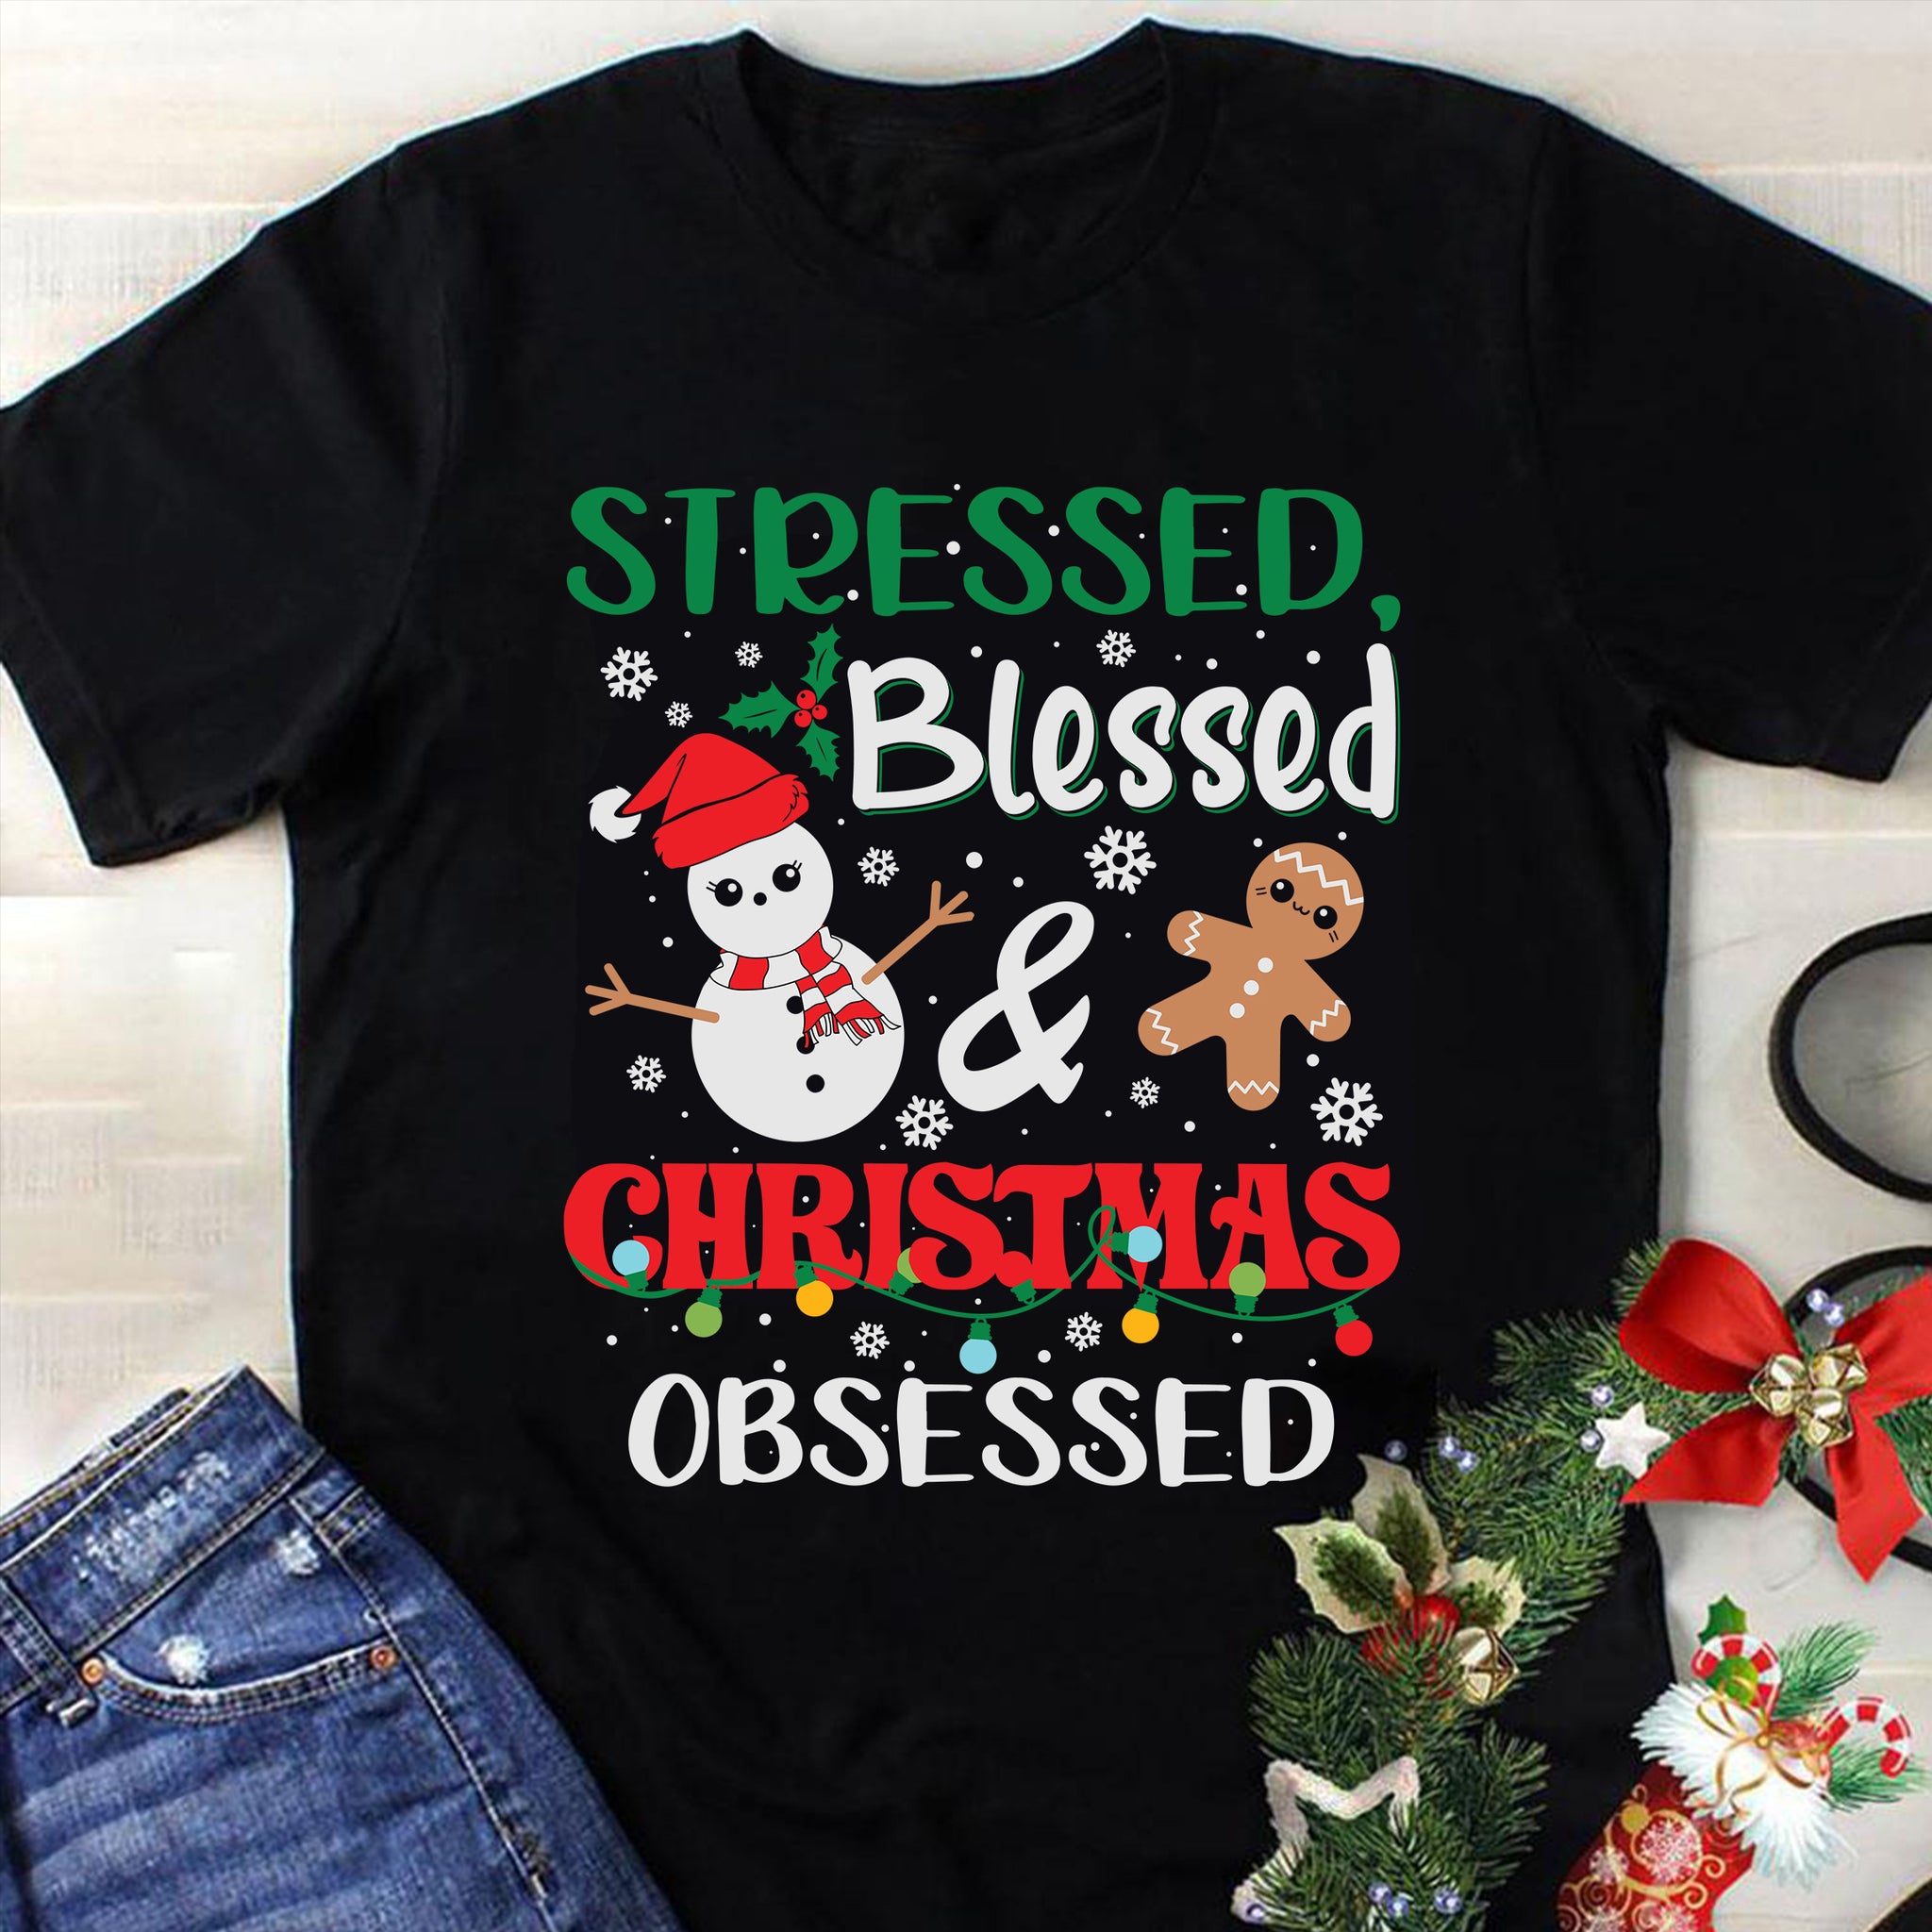 Siressed Blessed Christmas Obsessed Svg, Christmas Svg, Tree Christmas Svg, Tree Svg, Santa Svg, Snow Svg, Merry Christmas Svg, Hat Santa Svg, Light Christmas Svg